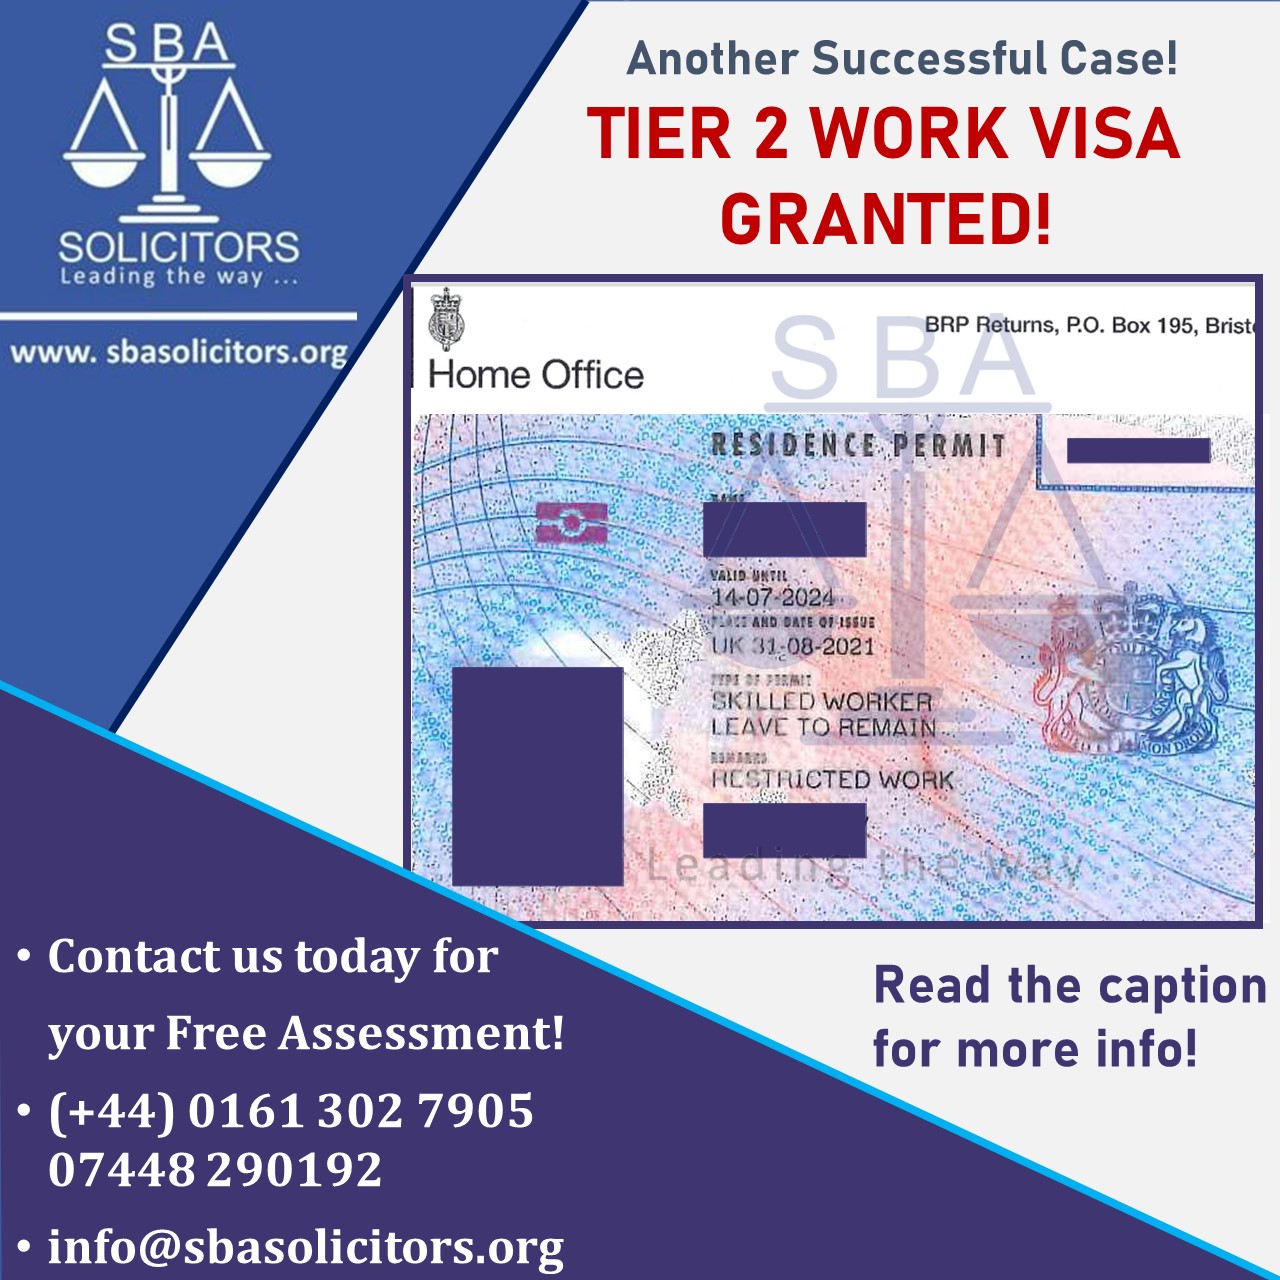 🟢TIER 2 WORK VISA GRANTED🟢

Our client has been granted a work visa for 3 years. She will get #settlement 5 years from now!

The client was on a #student_visa, we turned it into a #work_visa!

💯Here is what we did

1-Advising the client on her application
2- Providing Specific SOC Code for the client based on her qualifications and experiences
3- Providing a detailed list of documents
4- Advising on the financials
5- Drafting the relevant cover letters
6- Filling her application form
7- Uploading and Scanning her files
8- Booking her appointment

We are more than happy that our client got her visa in no time!
We can’t wait to help her in the rest of her journey!

⚖️SBA Solicitors will help you in every step of your journey!

Contact us today for your free consultation!
+44 (0) 161 302 7905
+44 (0) 7448 290192
Info@sbasolicitors.org